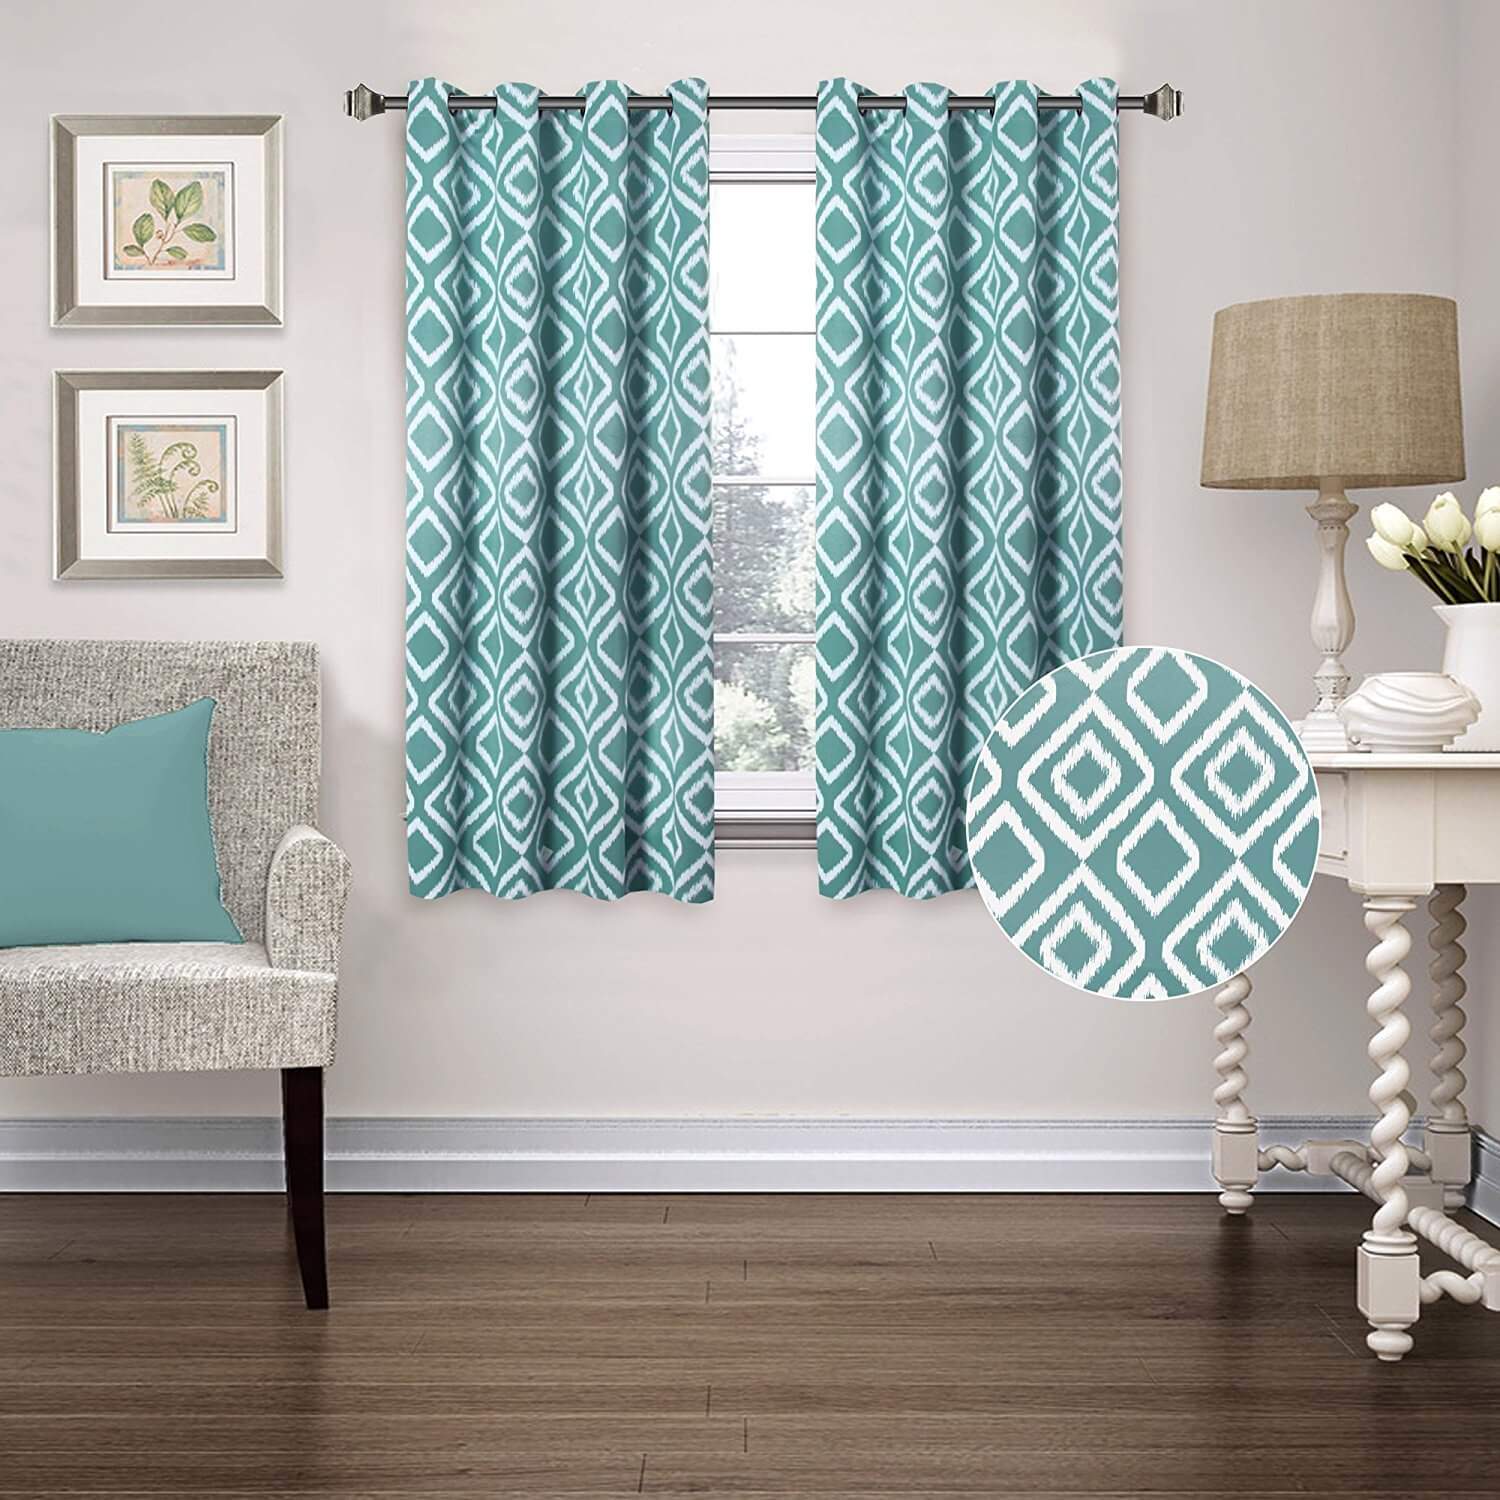 FlamingoP blackout curtains Ikat Fret Teal Unlined Thermal Insulated Window Curtains